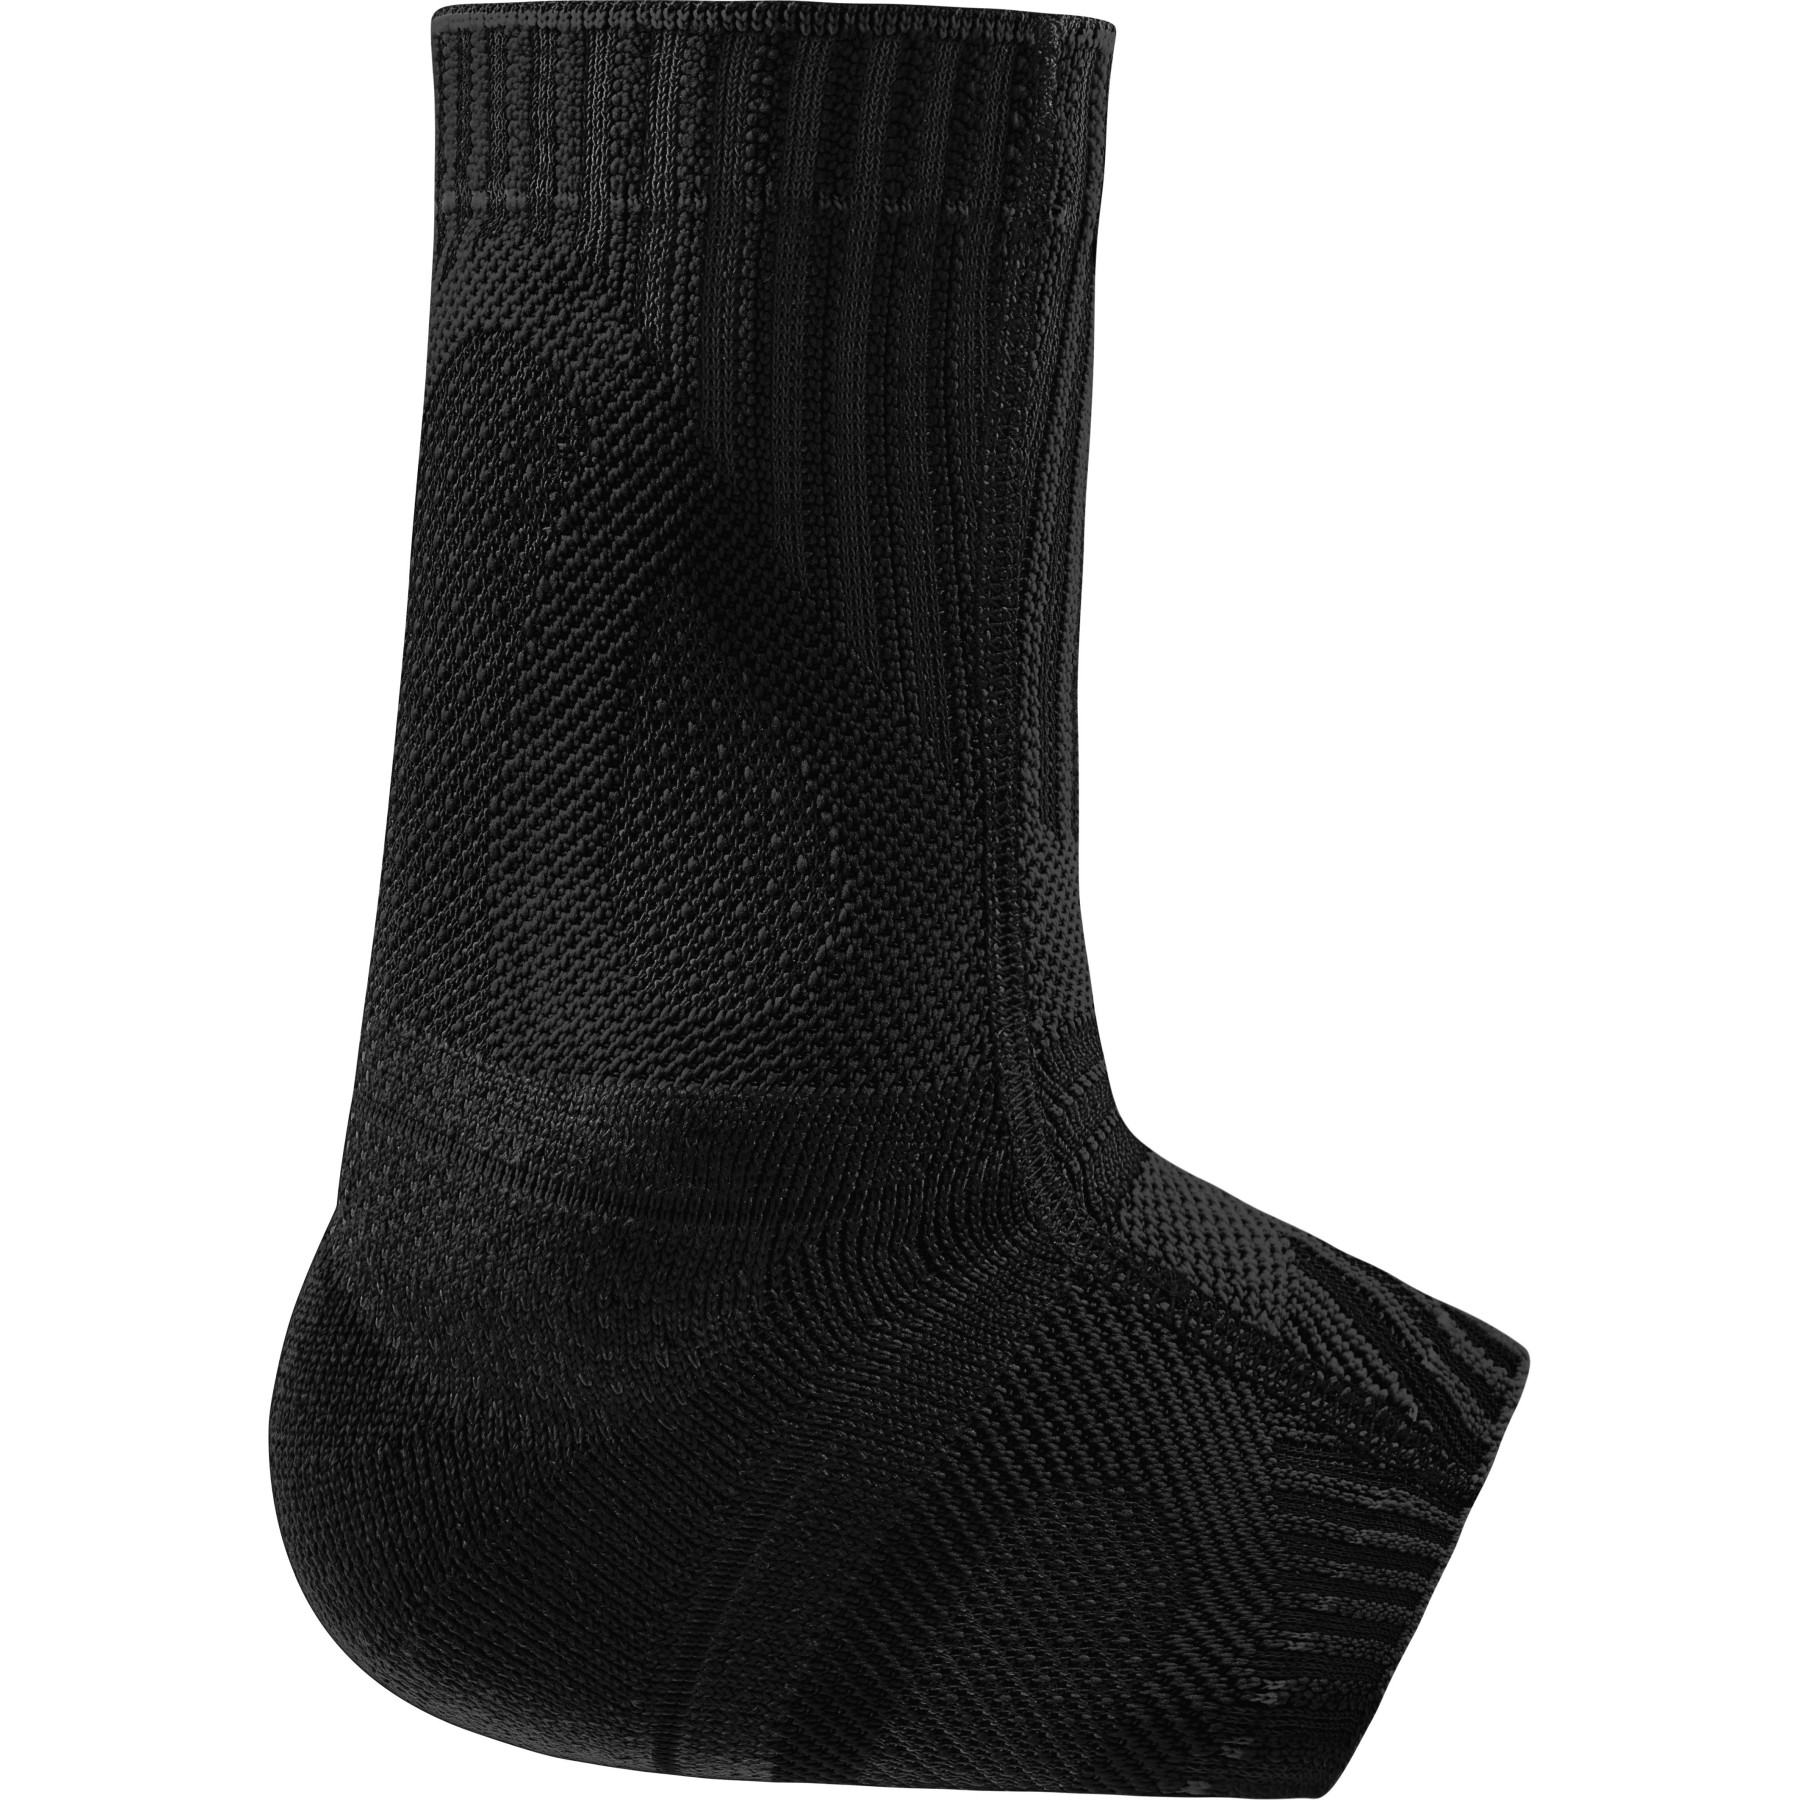 Picture of Bauerfeind Sports Achilles Support - black